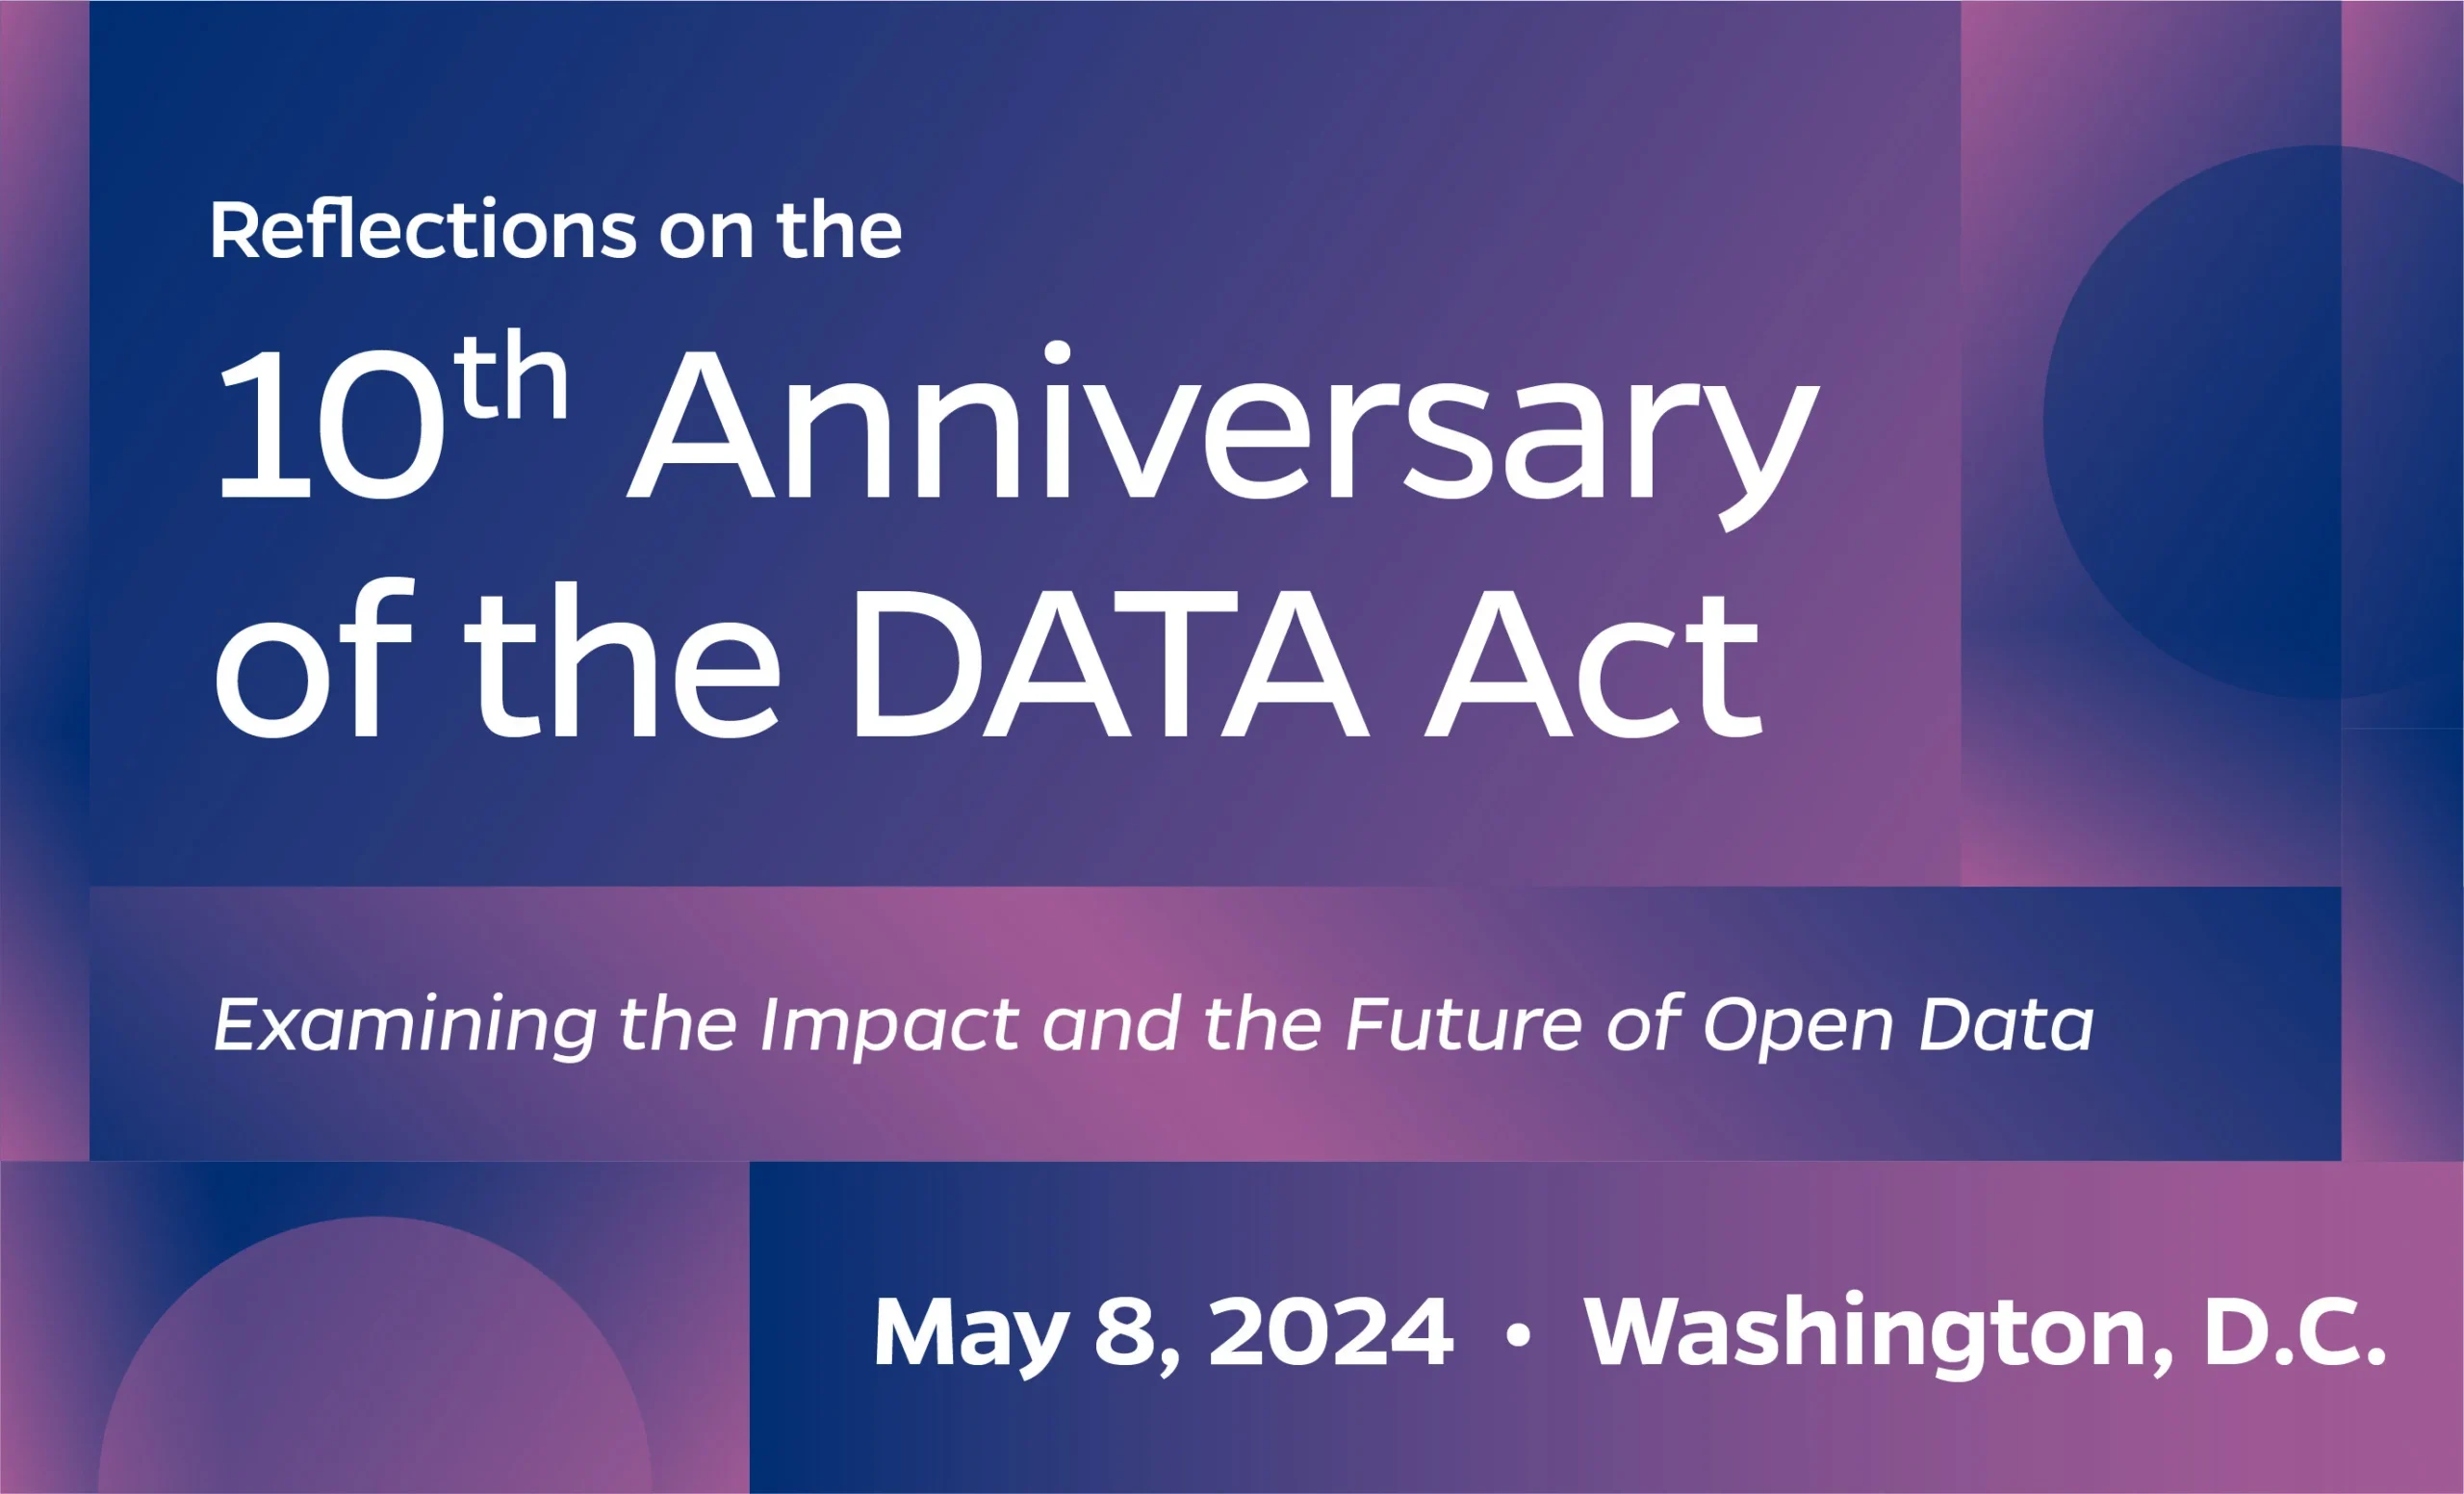 Reflections on the 10th Anniversary of the DATA Act: Examining the Impact and the Future of Open Data. May 8, 2024. Washington, D.C.